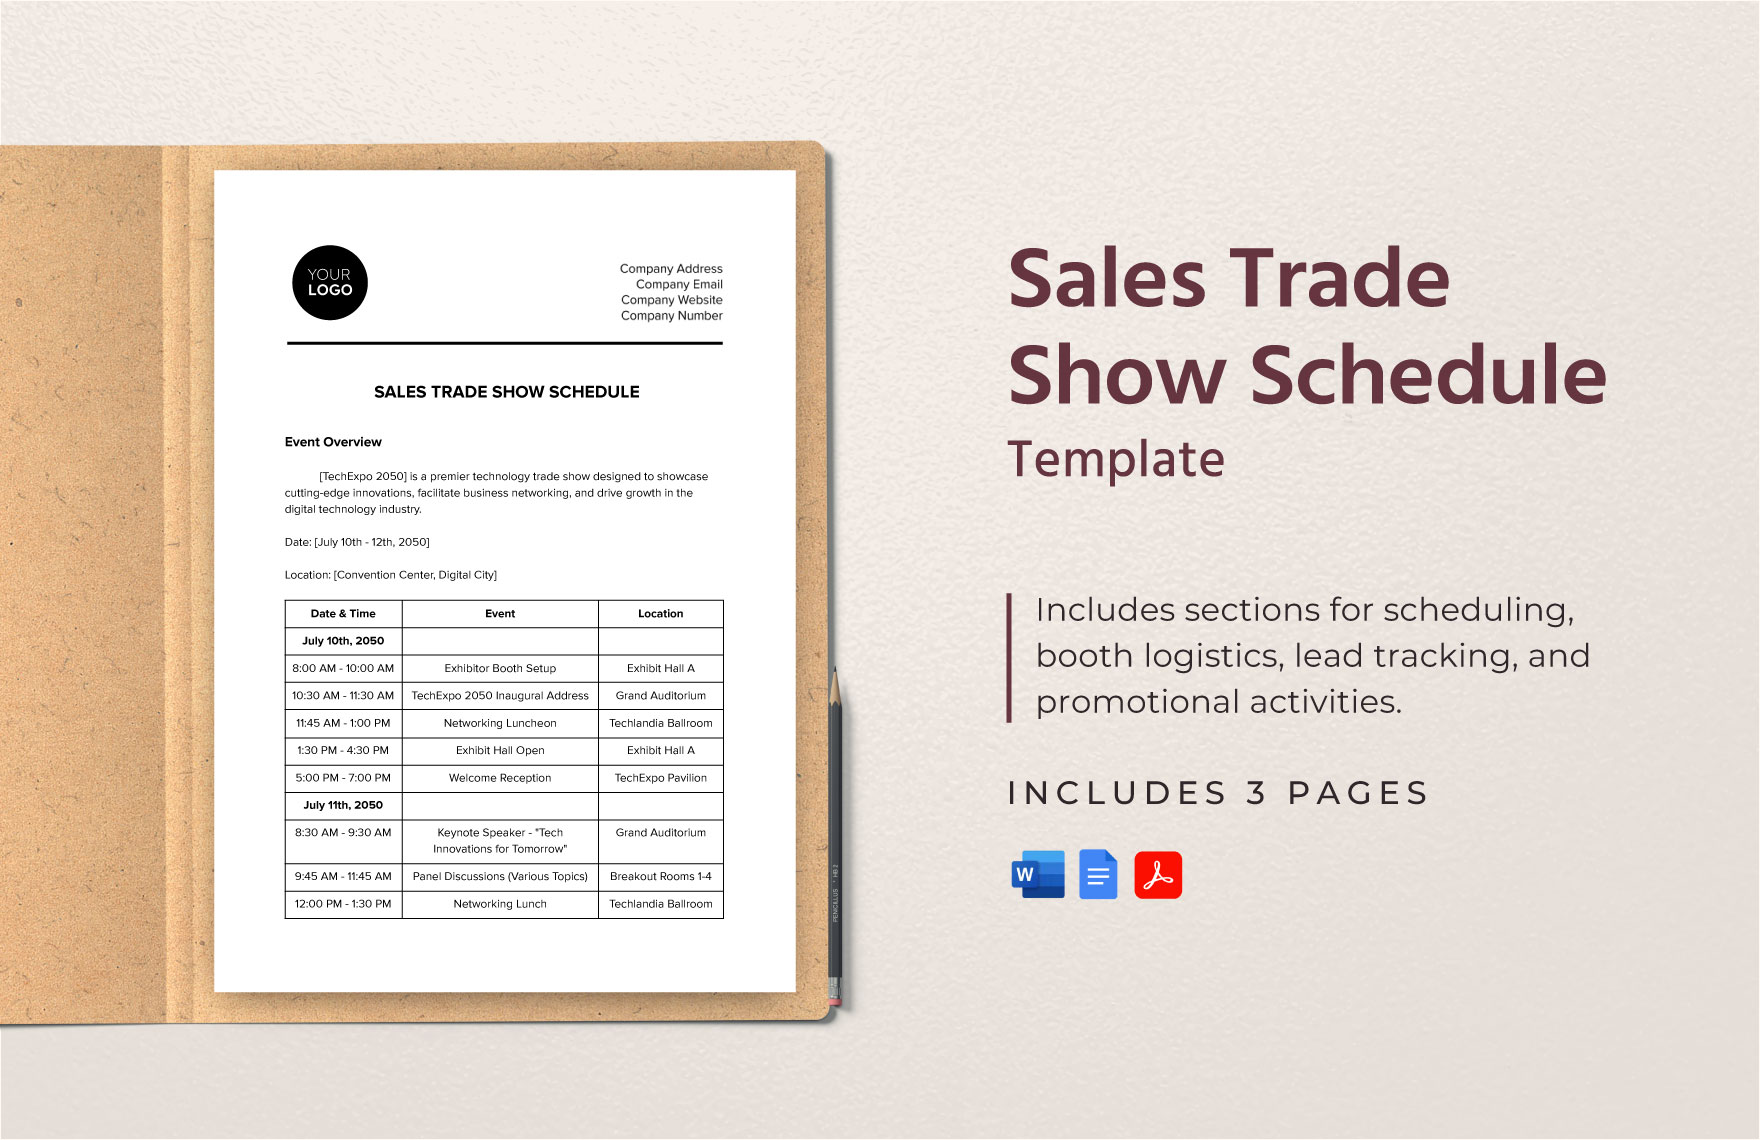 Sales Trade Show Schedule Template in Word, Google Docs, PDF